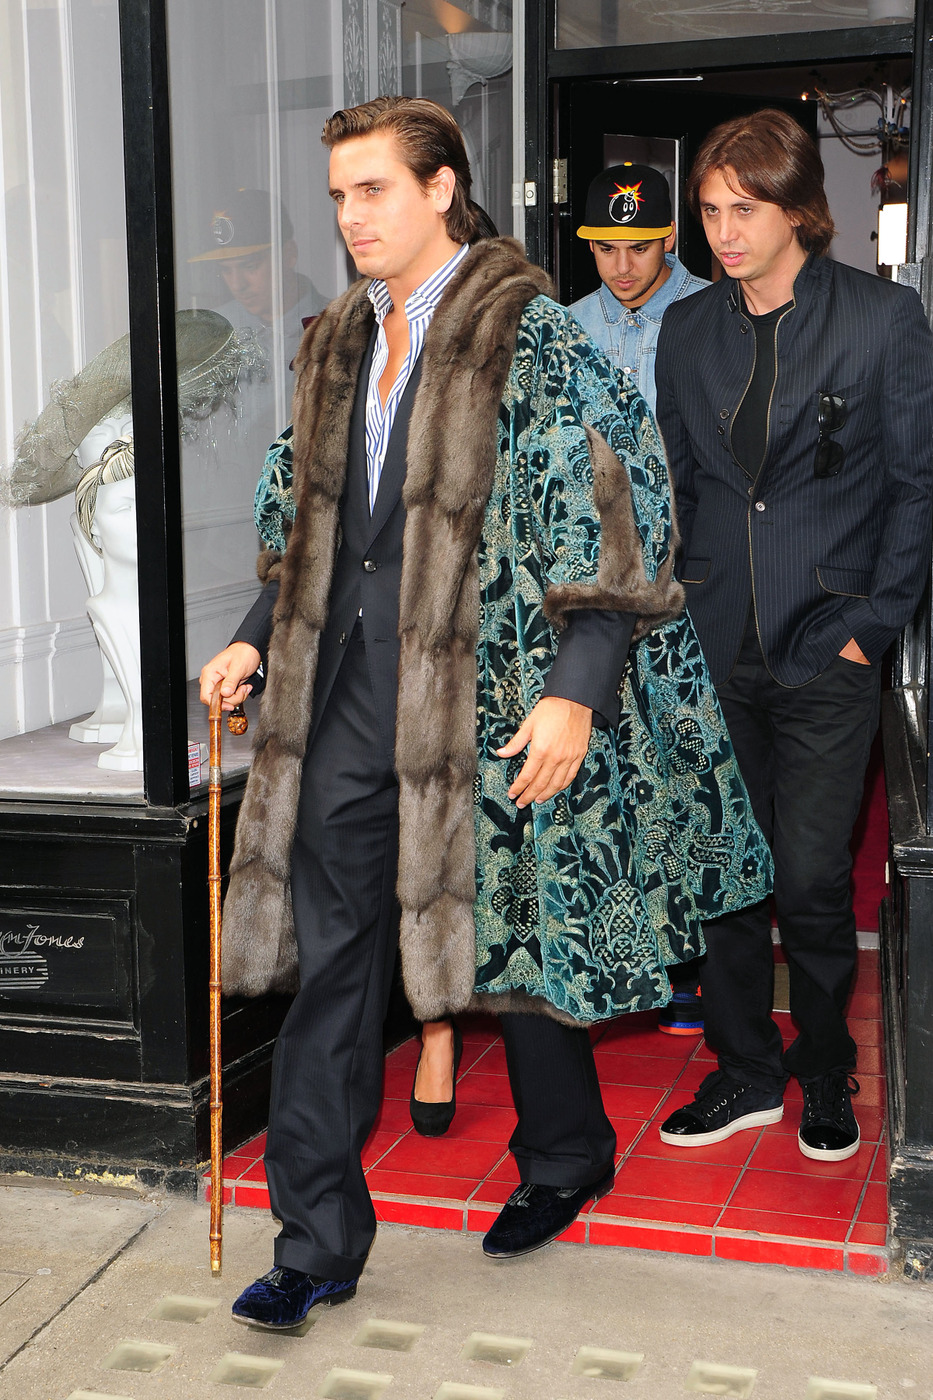 Rob Kardashian and Scott Disick, wearing a unique, fur lined, patterned coat, film scenes for 'Keeping Up with the Kardashians' whilst shopping in London